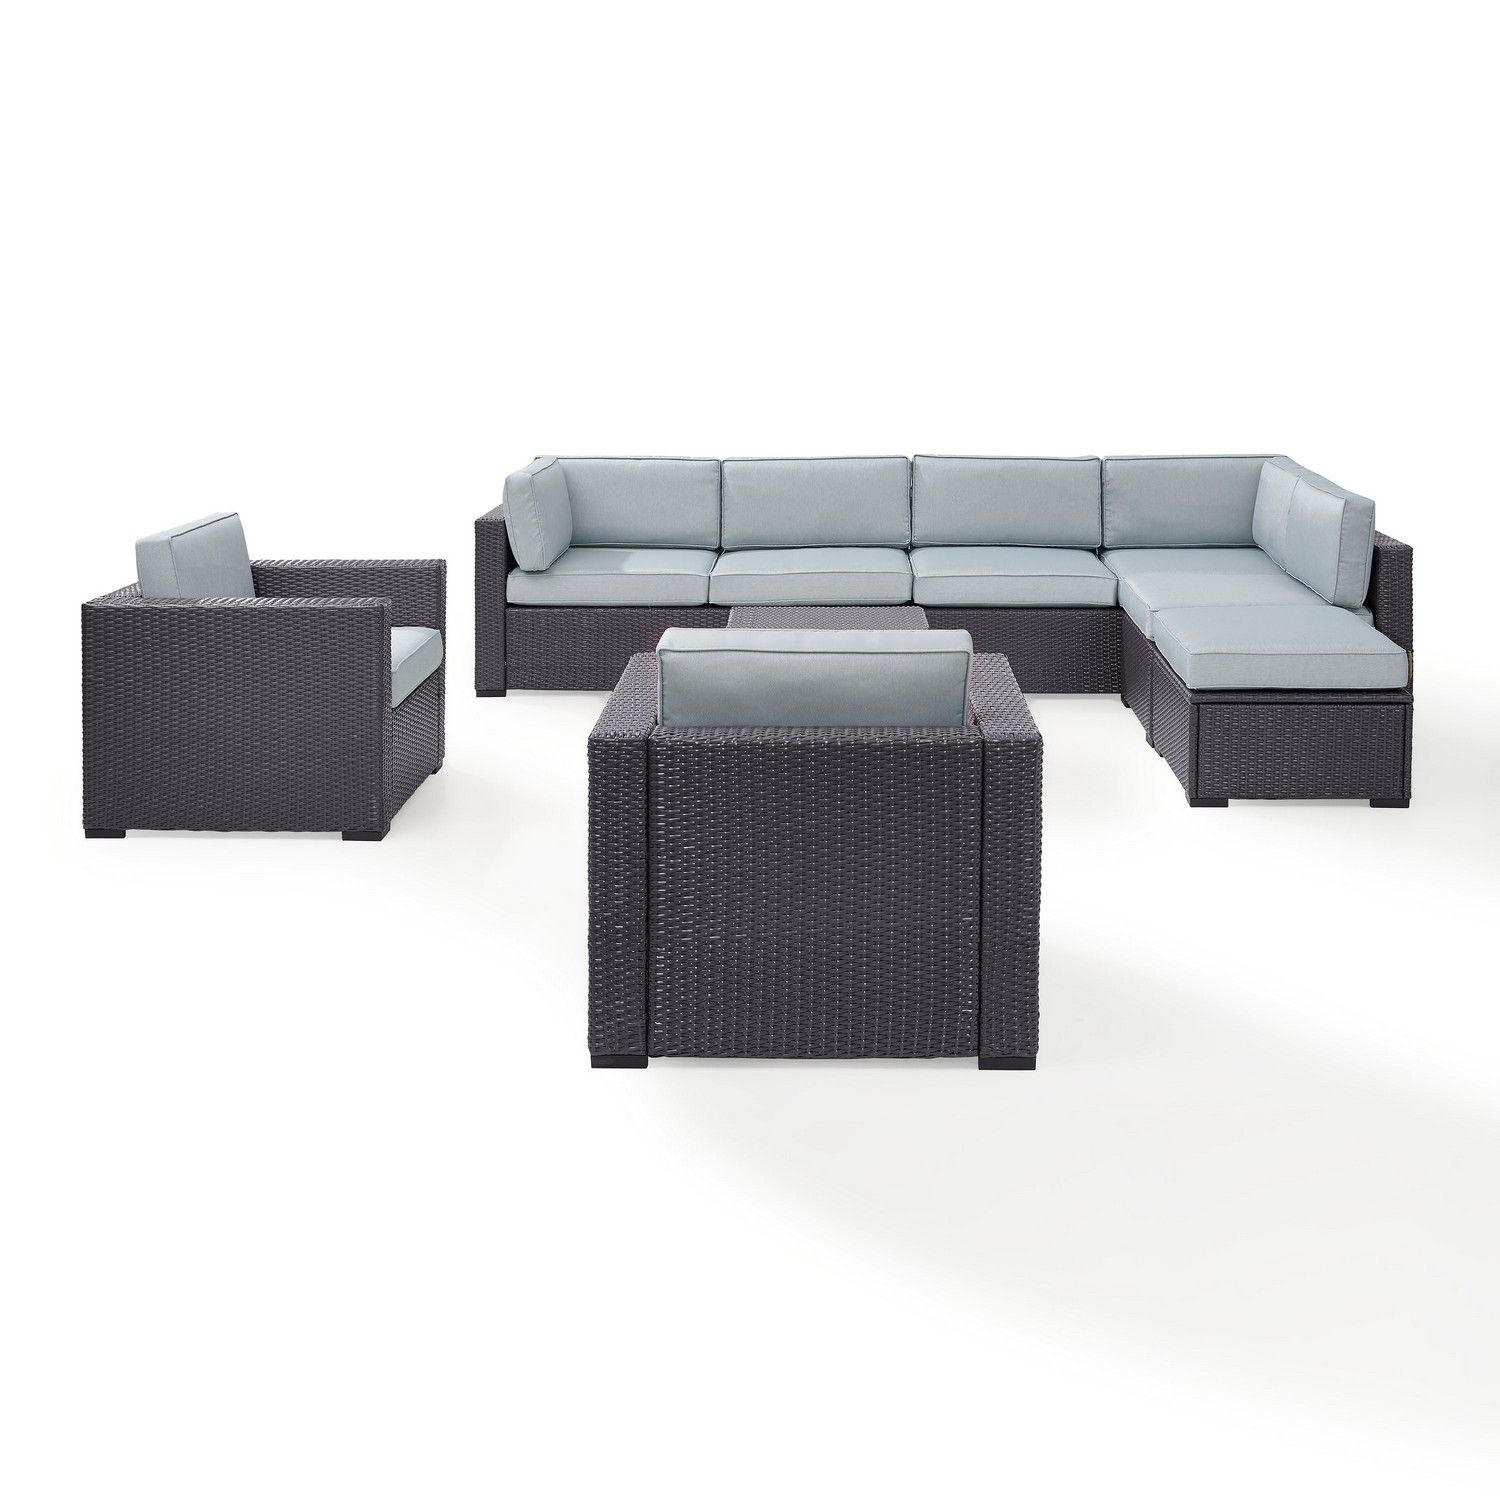 Crosley Biscayne 7-PC Outdoor Wicker Sectional Set - 2 Loveseats, 2 Arm Chairs, Armless Chair, Coffee Table, Ottoman - Mist/Brown